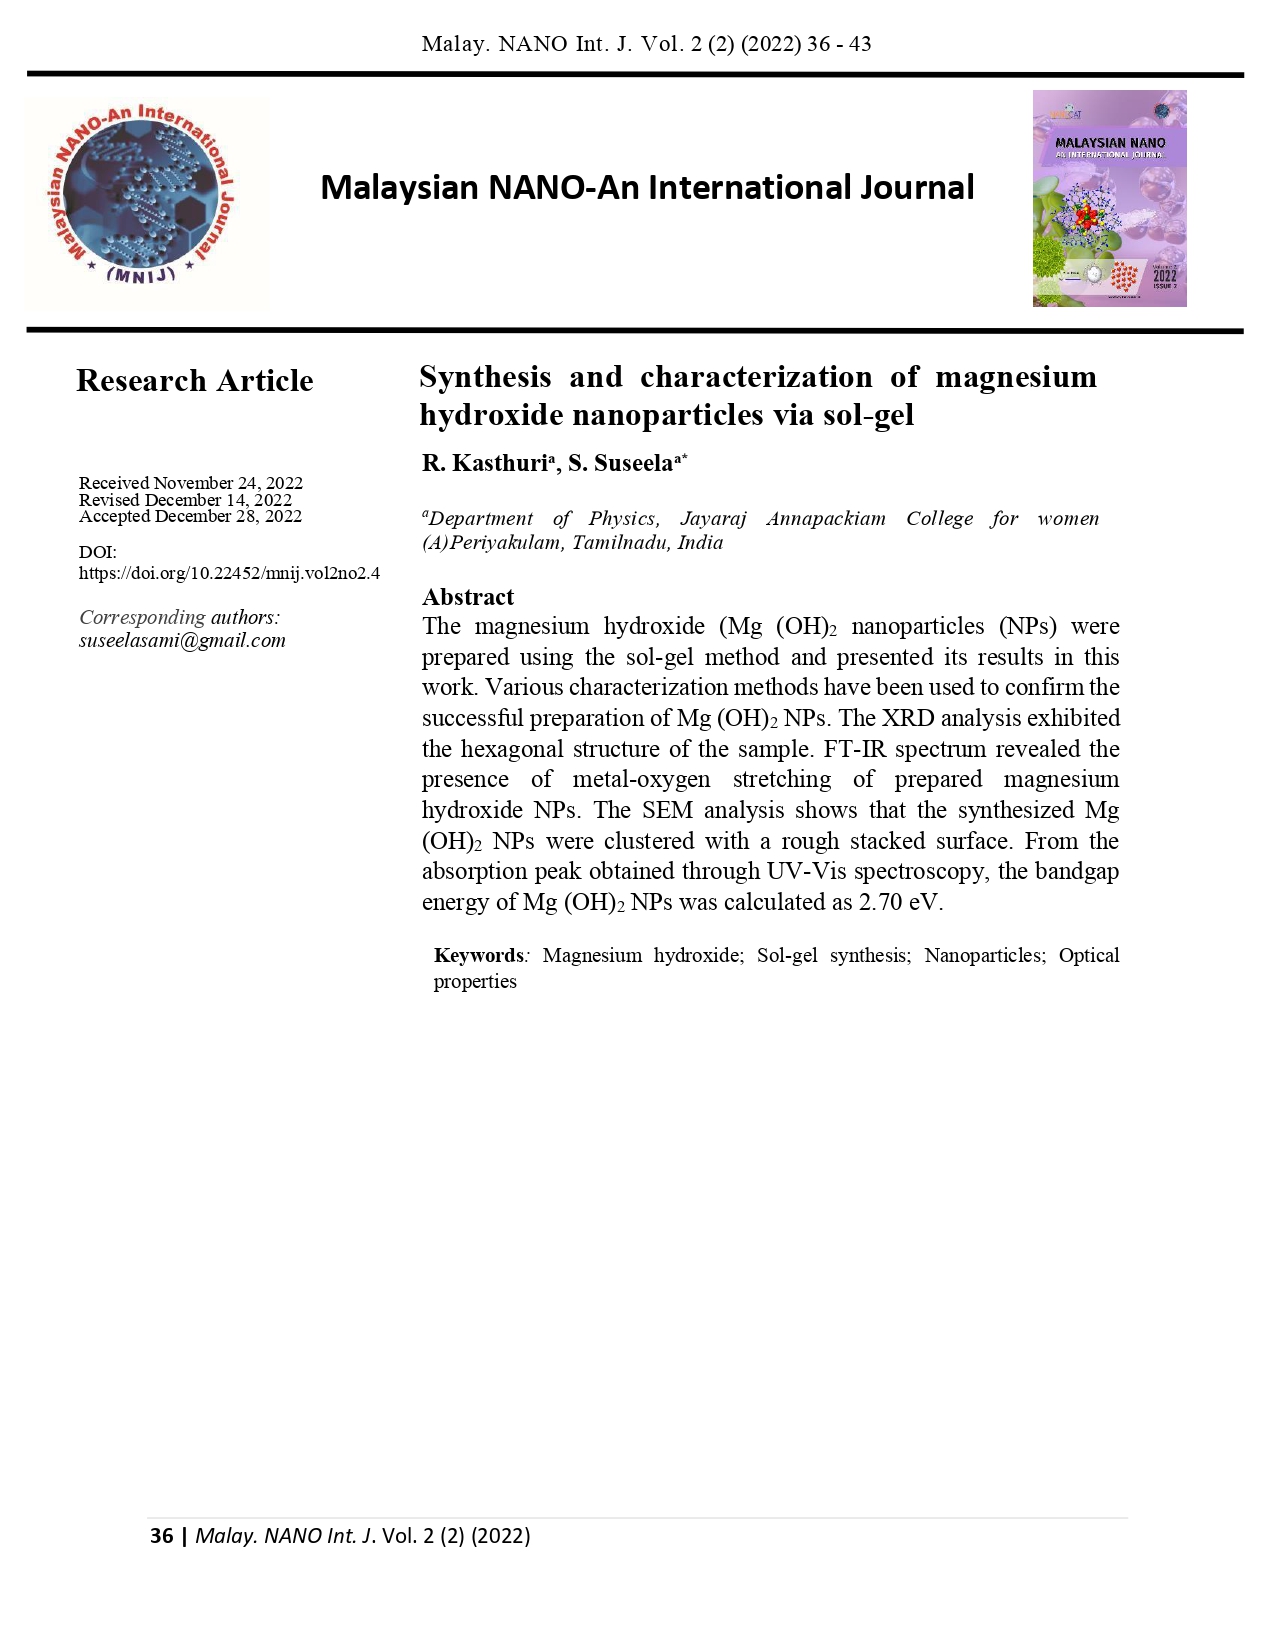 Synthesis and characterization of magnesium hydroxide nanoparticles via sol-gel